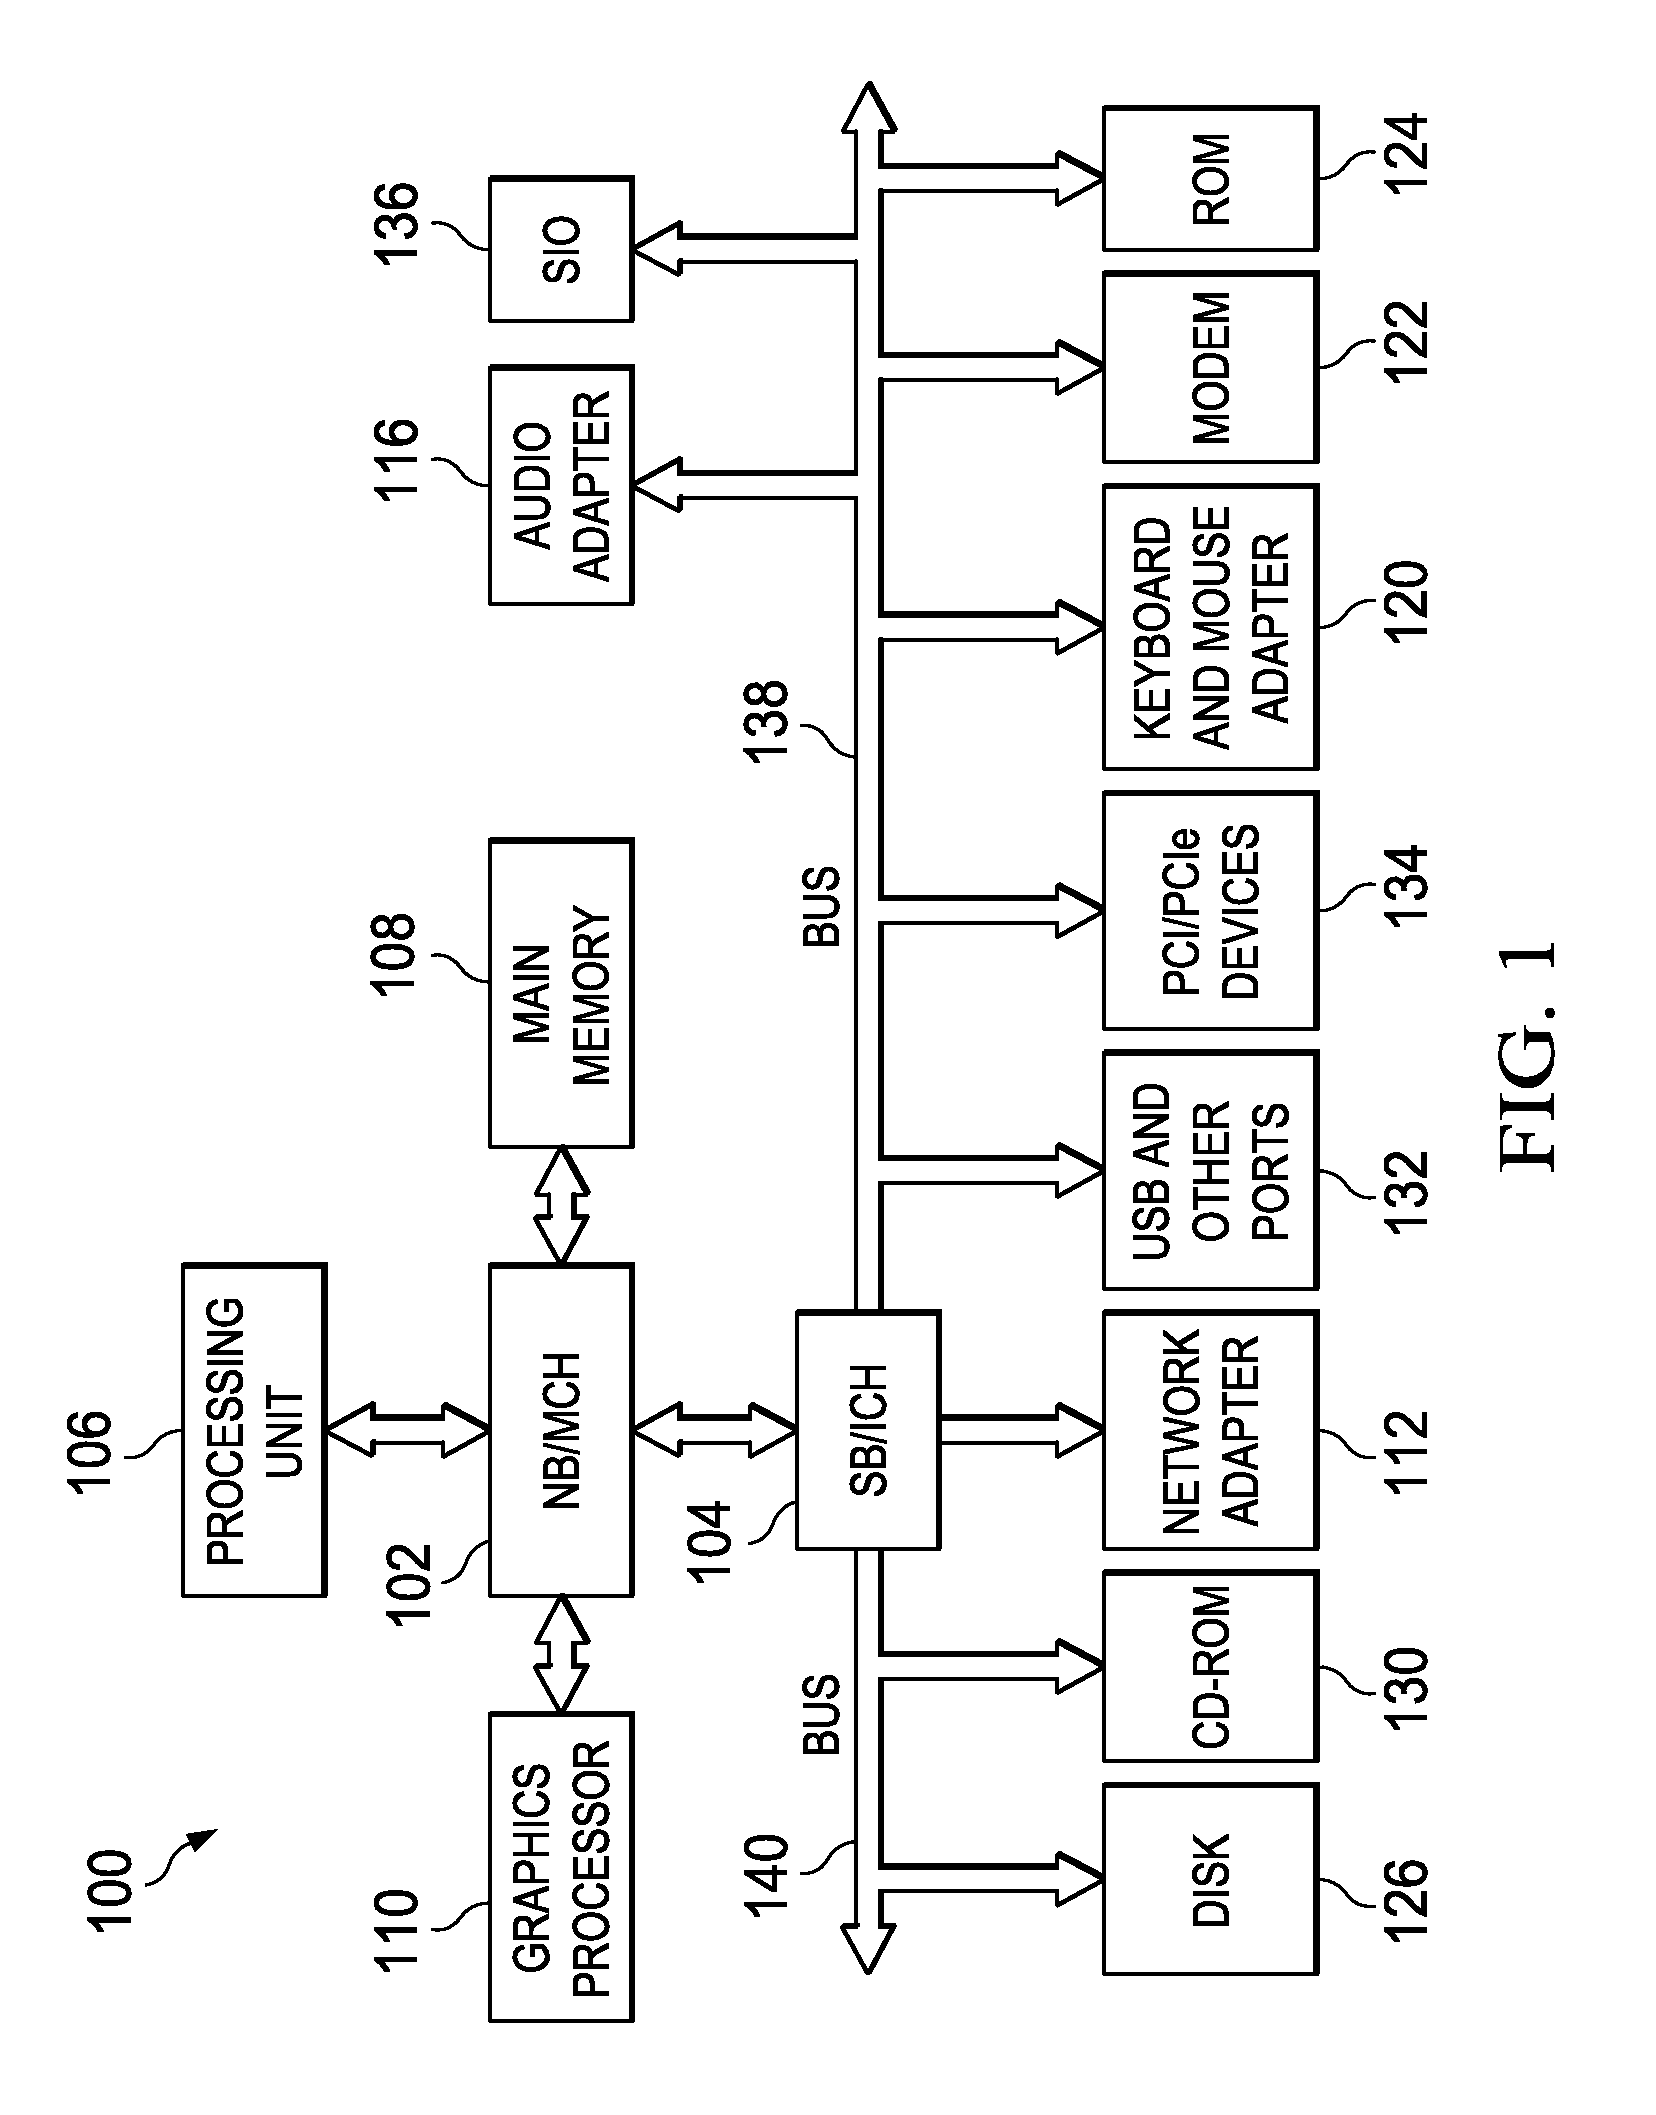 Generating and Executing Programs for a Floating Point Single Instruction Multiple Data Instruction Set Architecture